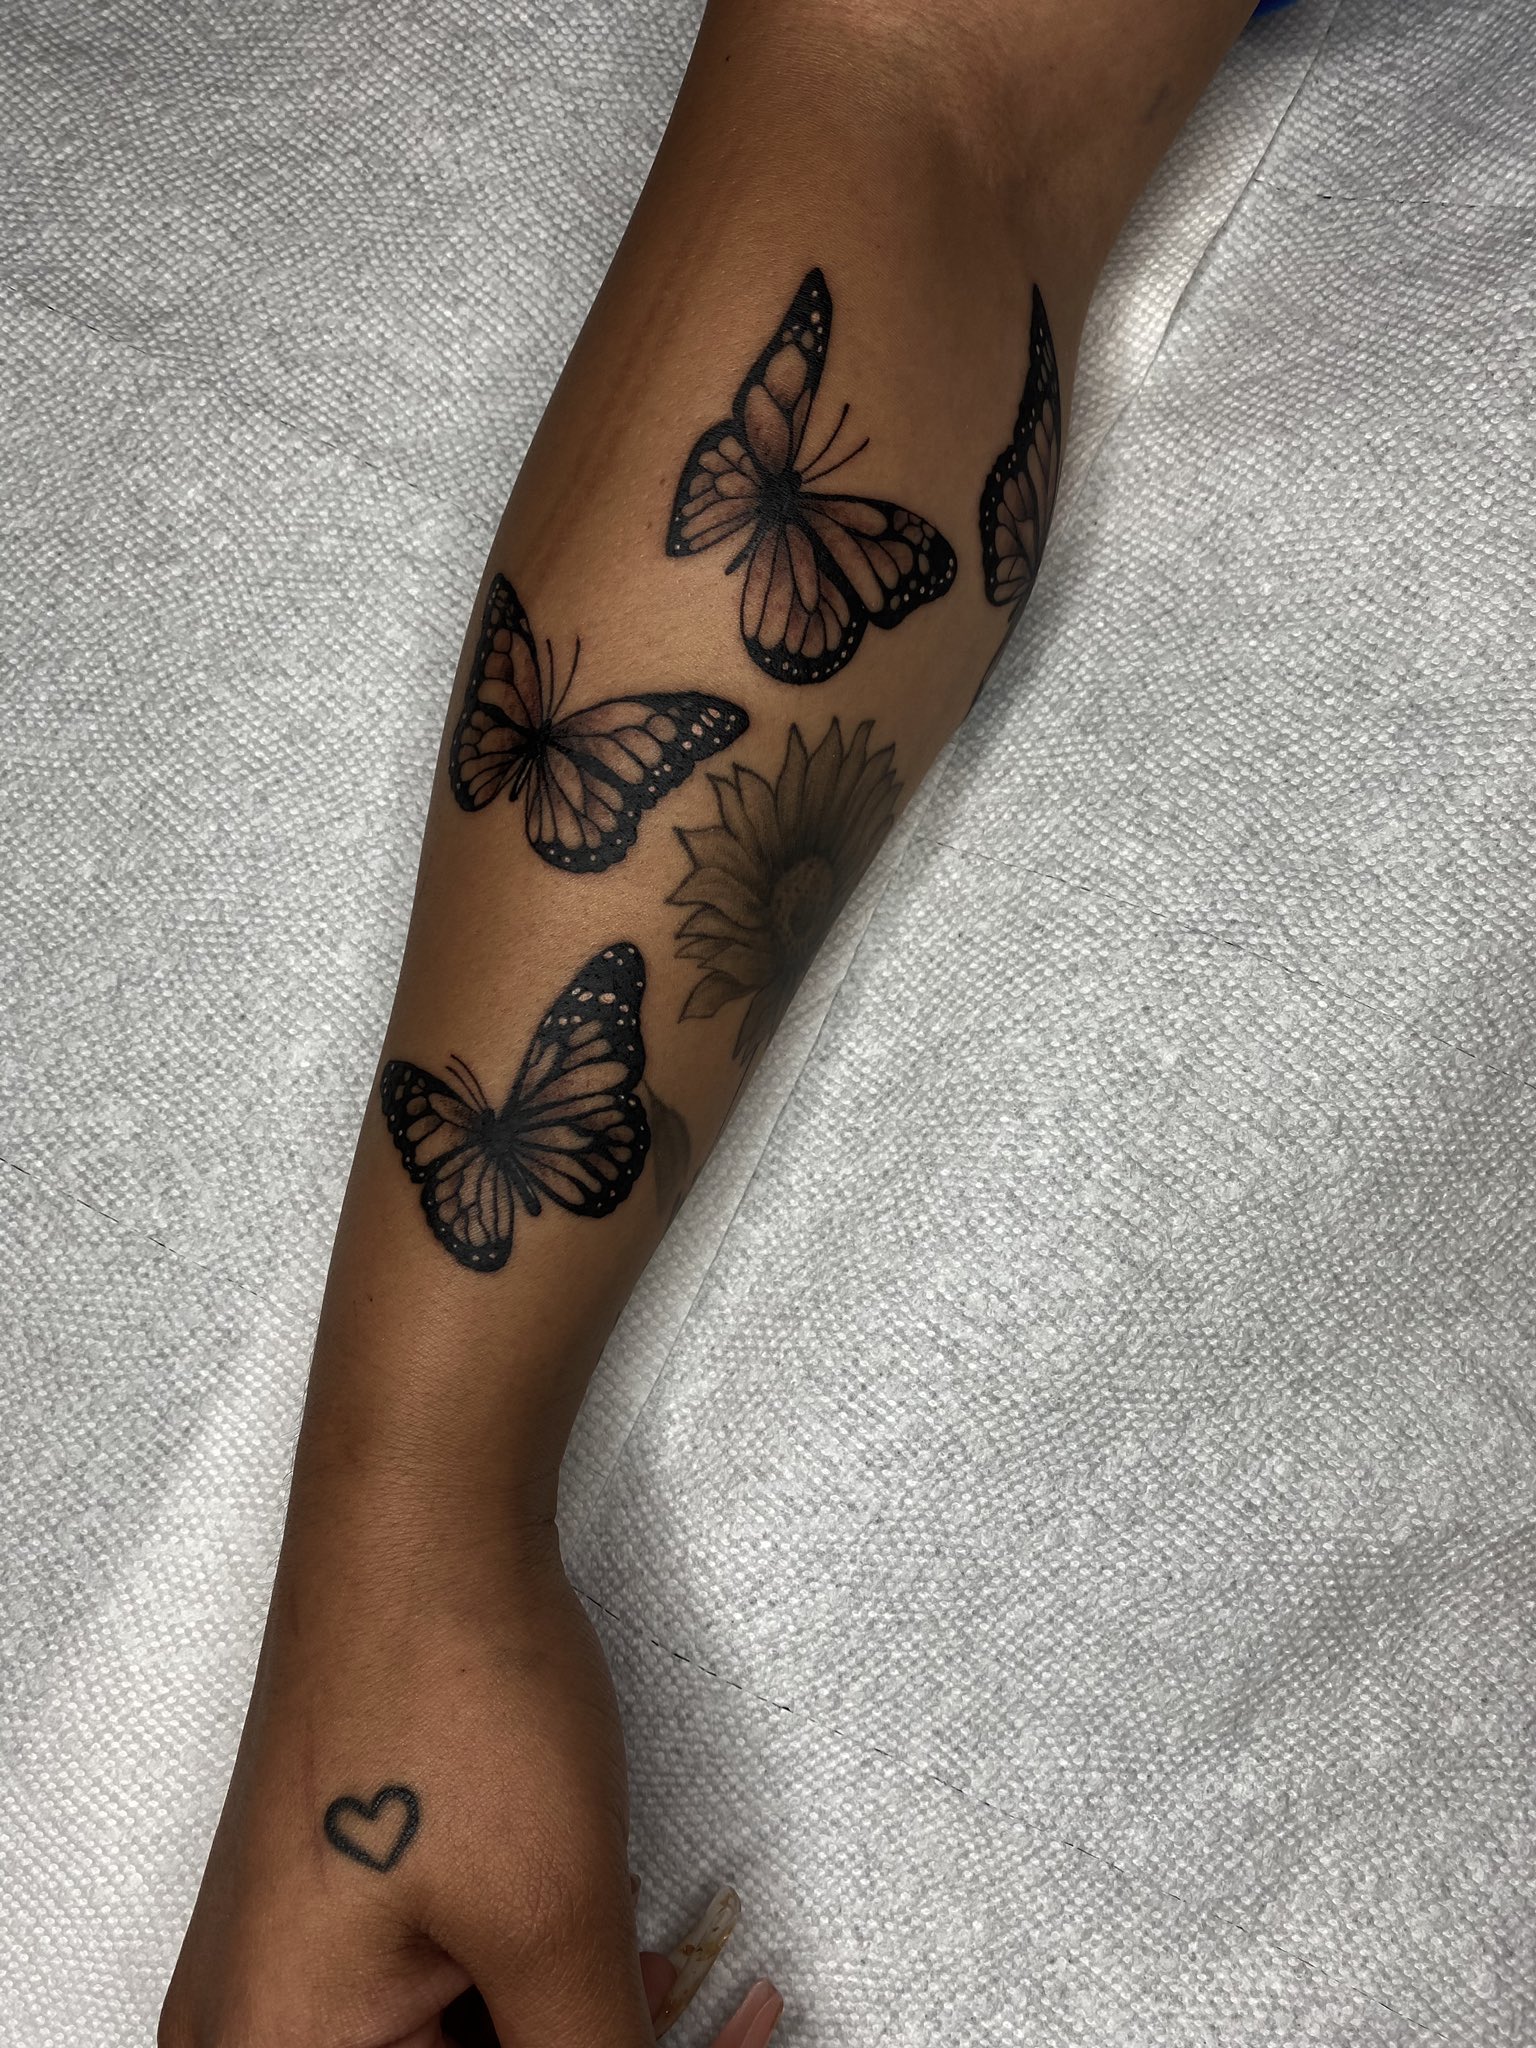 45 Butterfly Tattoo Designs Small Flower Simple Ideas  More  DMARGE